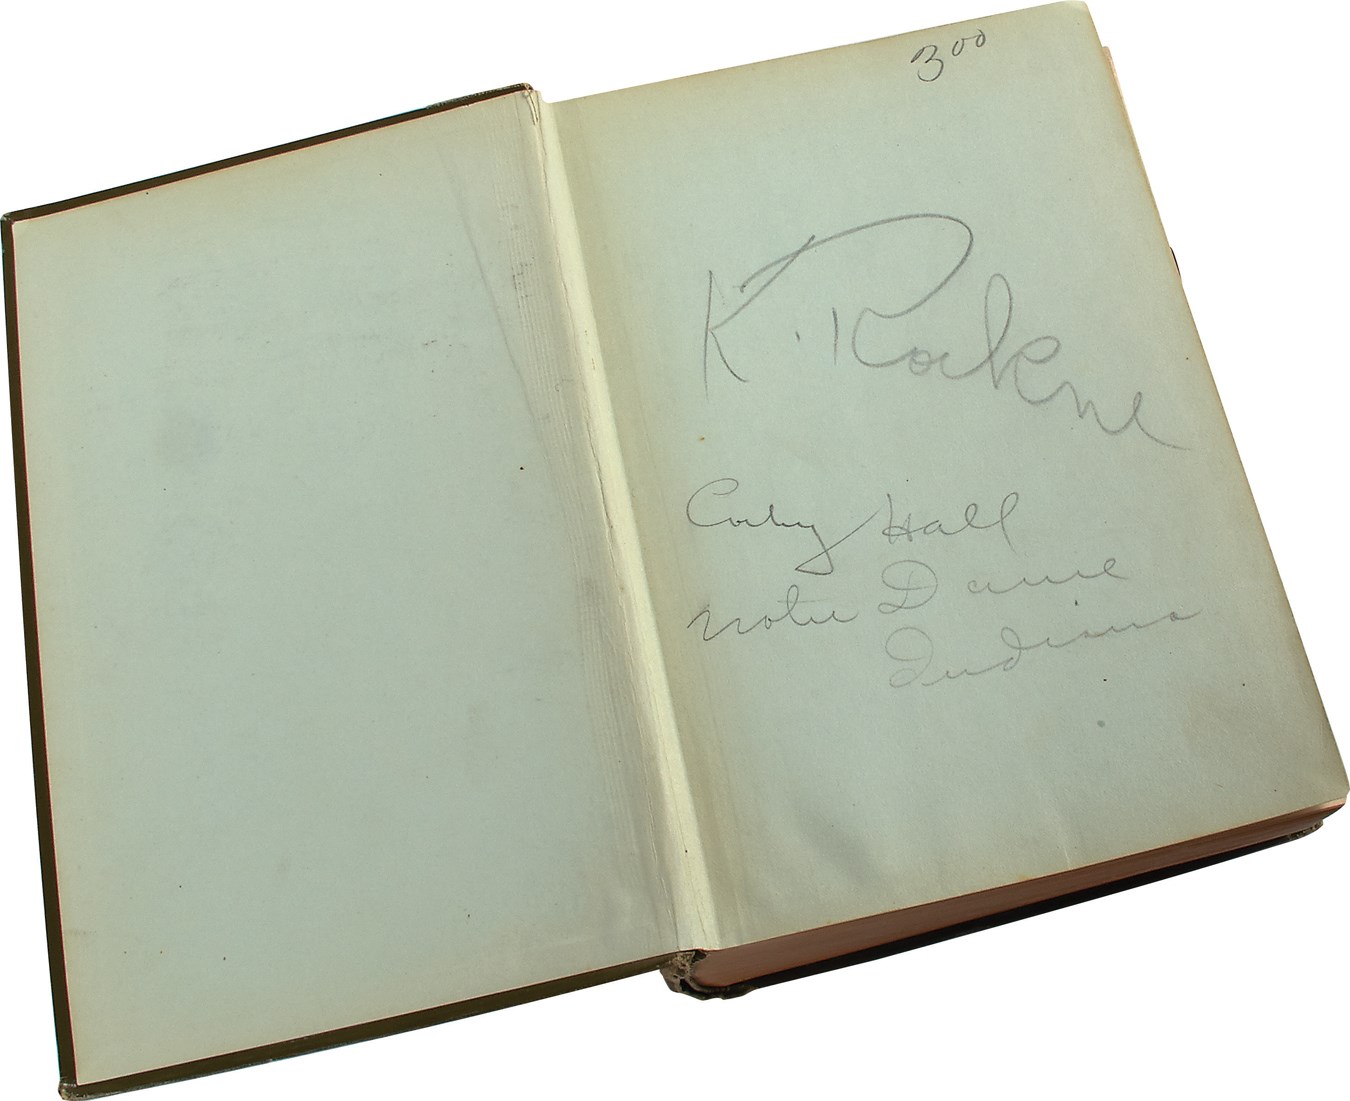 1911 Knute Rockne Signed, Personally-Owned Student Book at Notre Dame - Family Sourced (JSA)